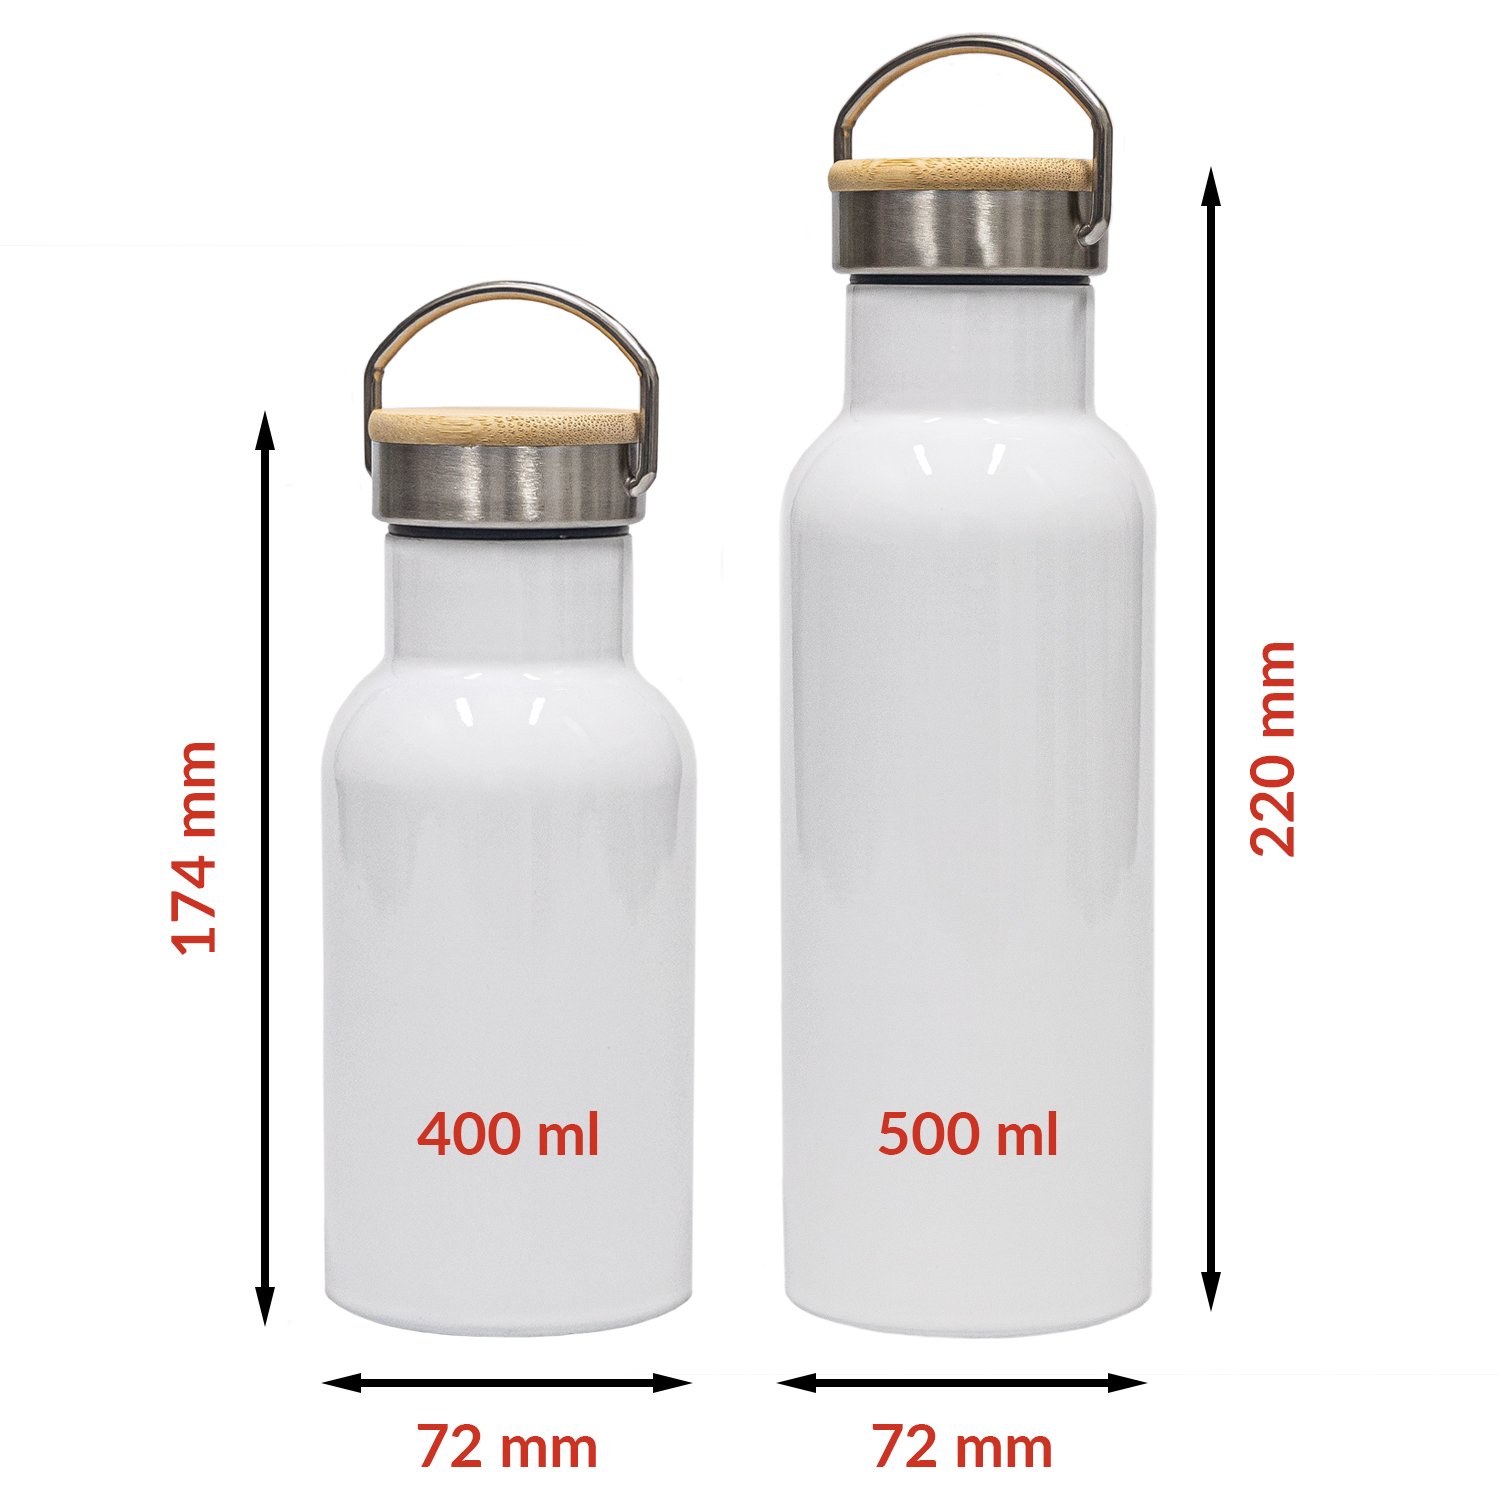 Faultier Emaille-Thermosflasche mit Wunschname